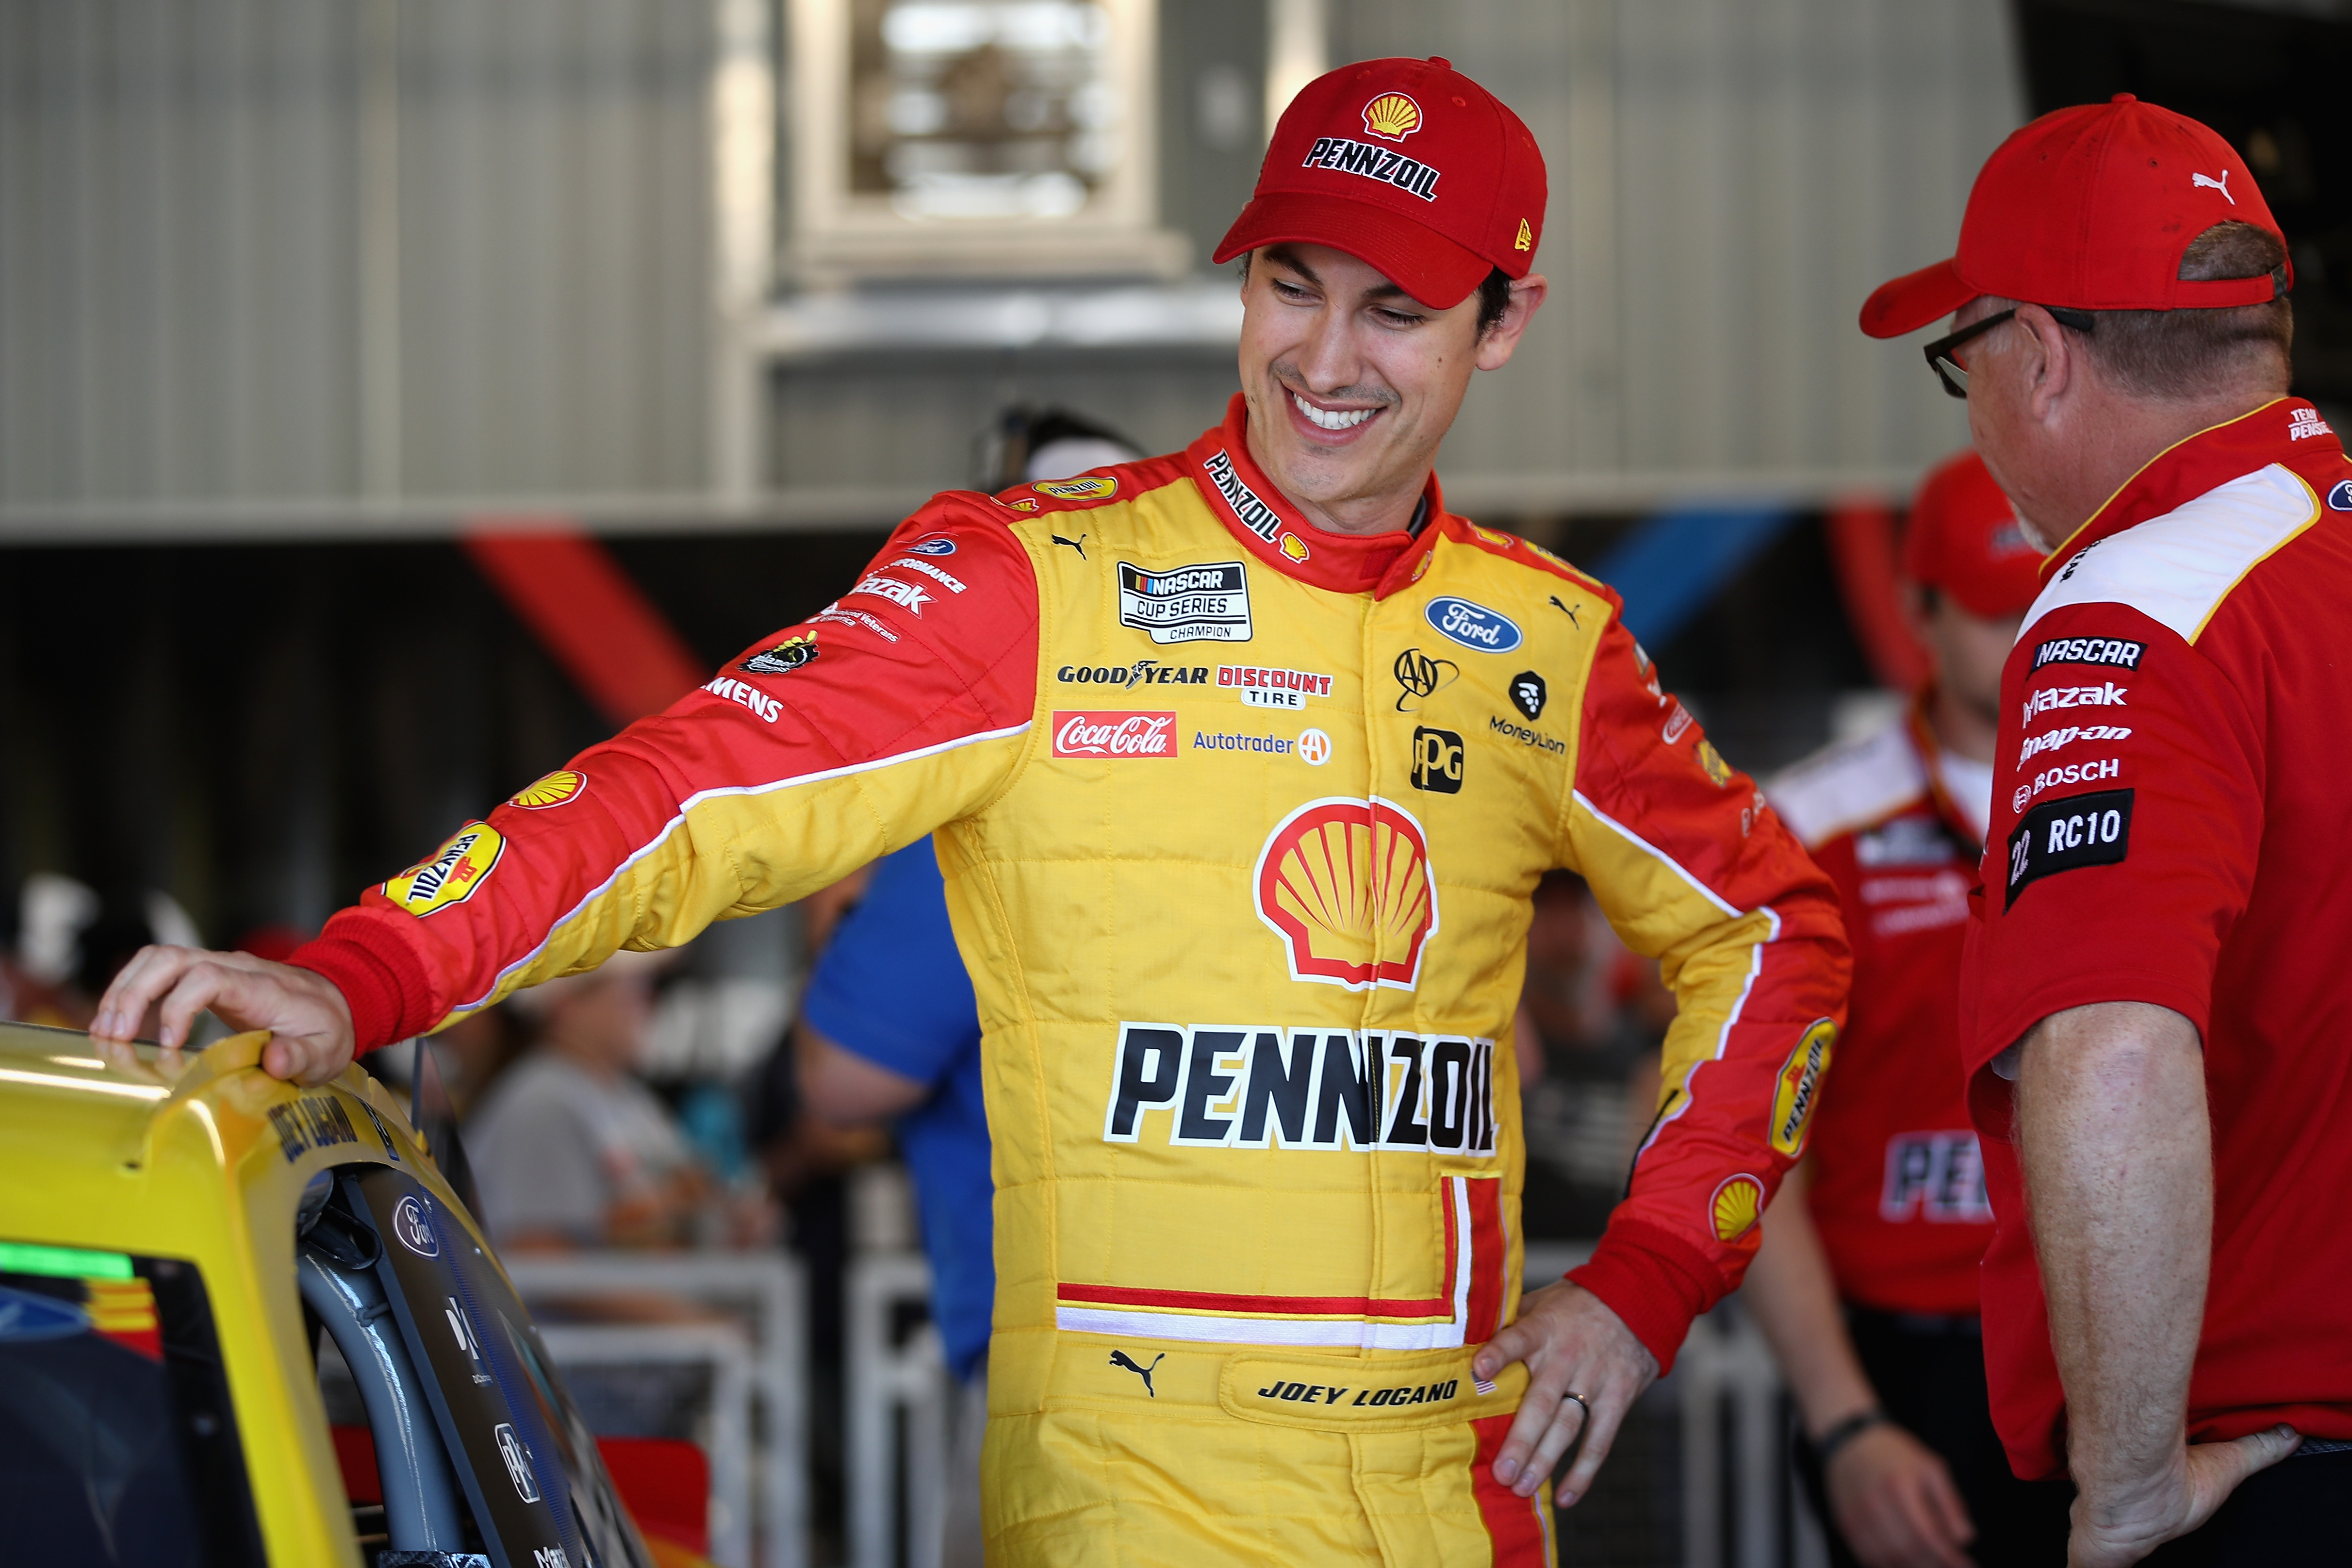 Joey Logano, driver of the #22 Shell Pennzoil Ford, stands in the garage during practice